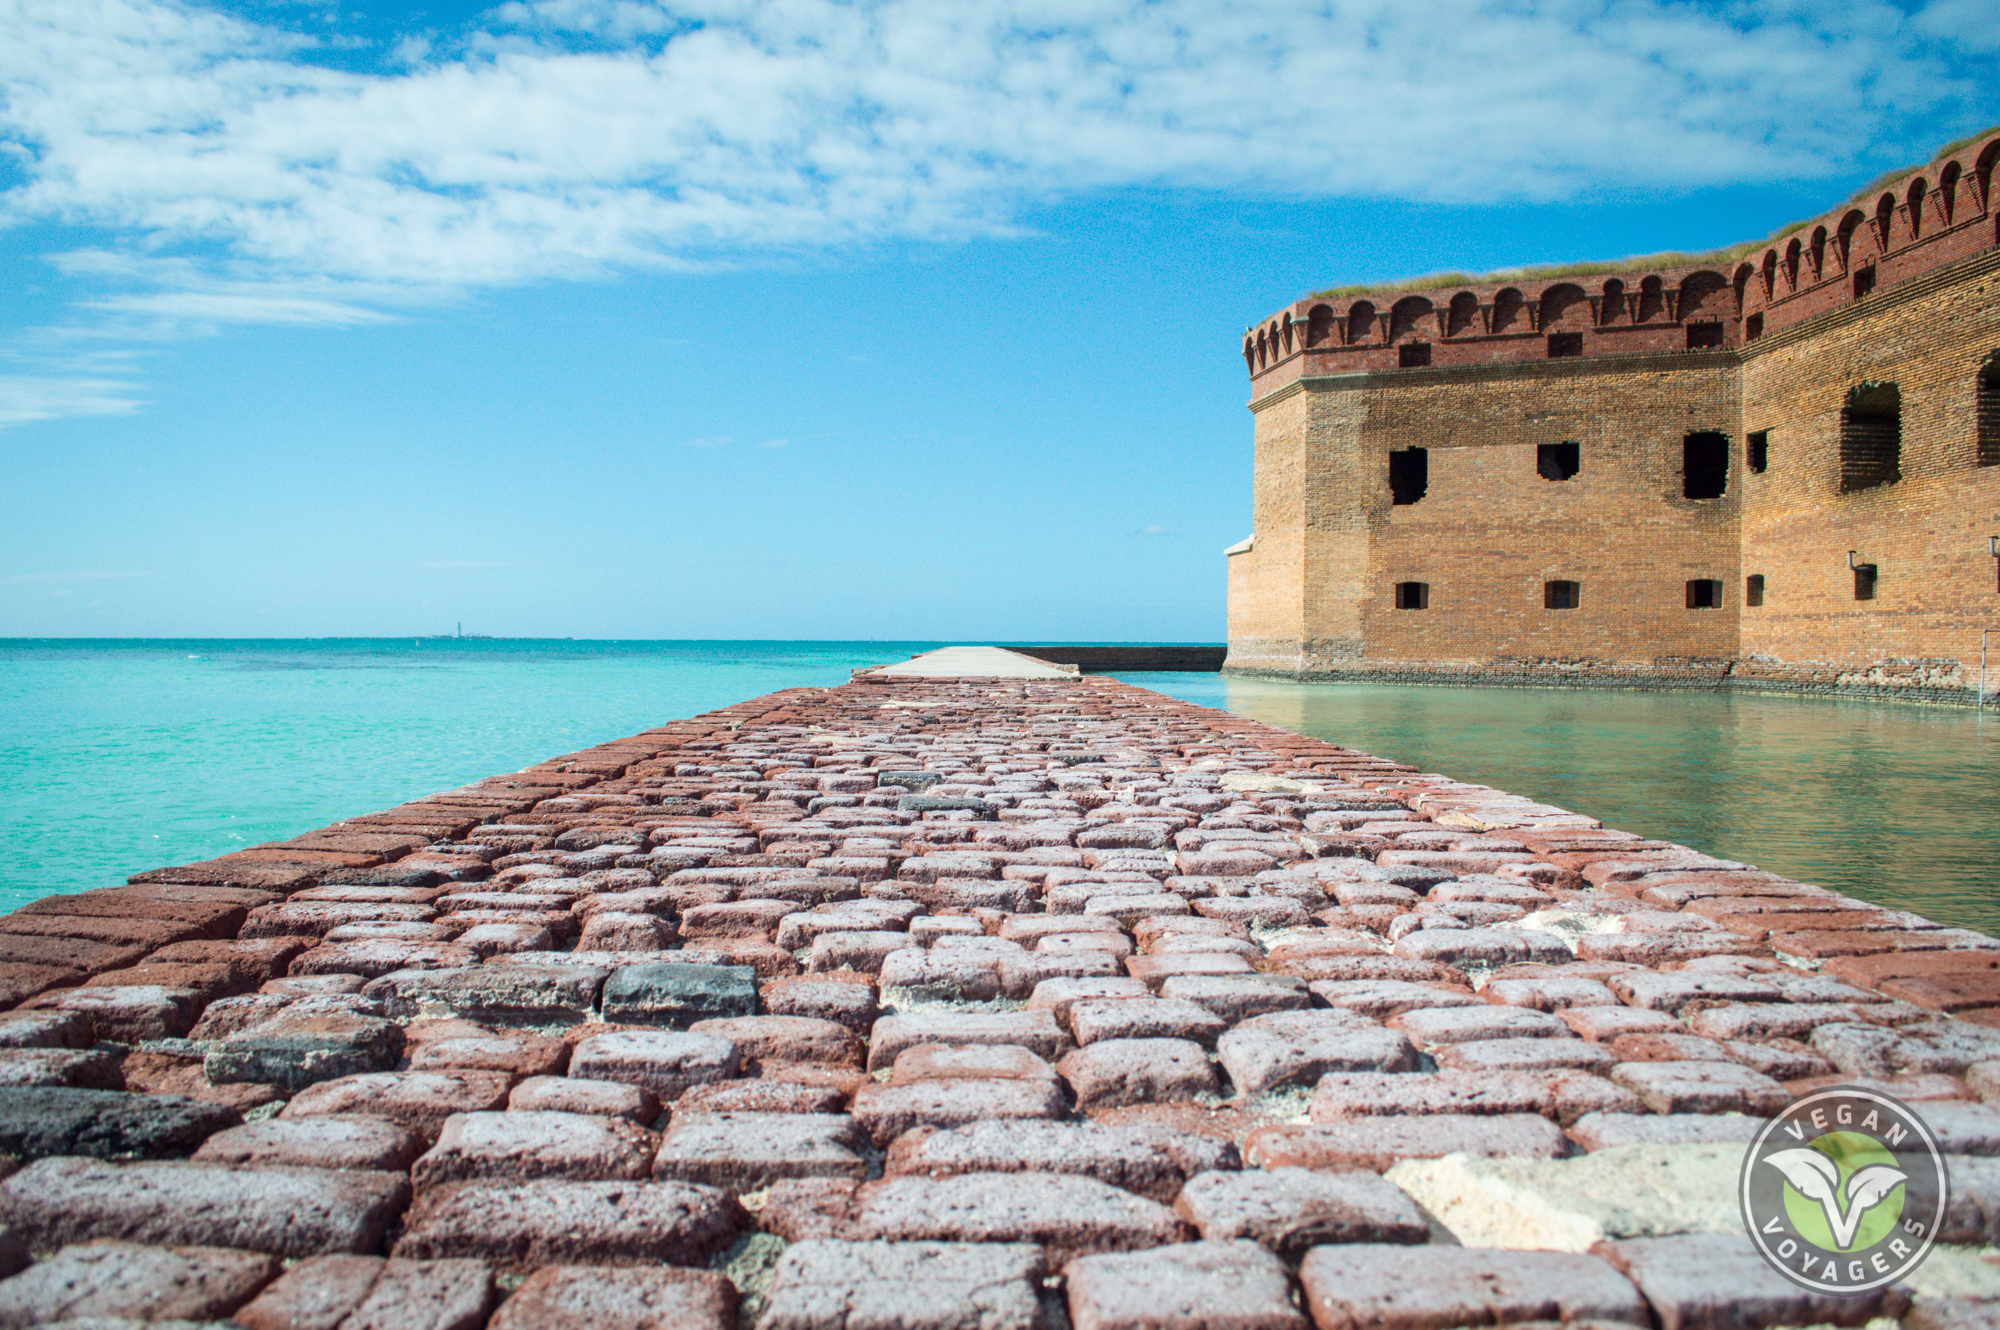 Fort Jefferson in the Dry Tortugas National Park about 68 